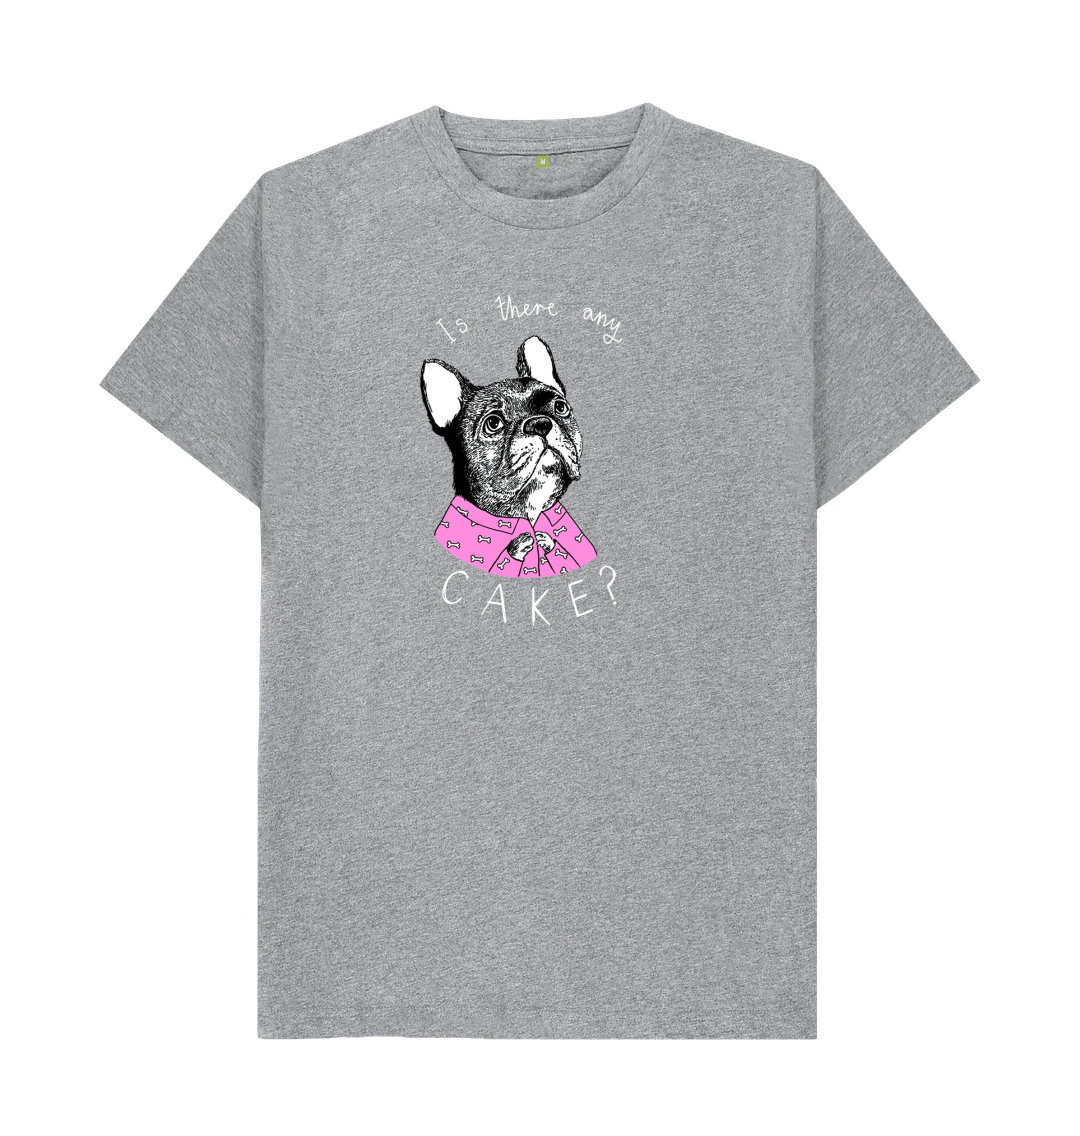 Athletic Grey 'Is There Any Cake?' Men's T-shirt